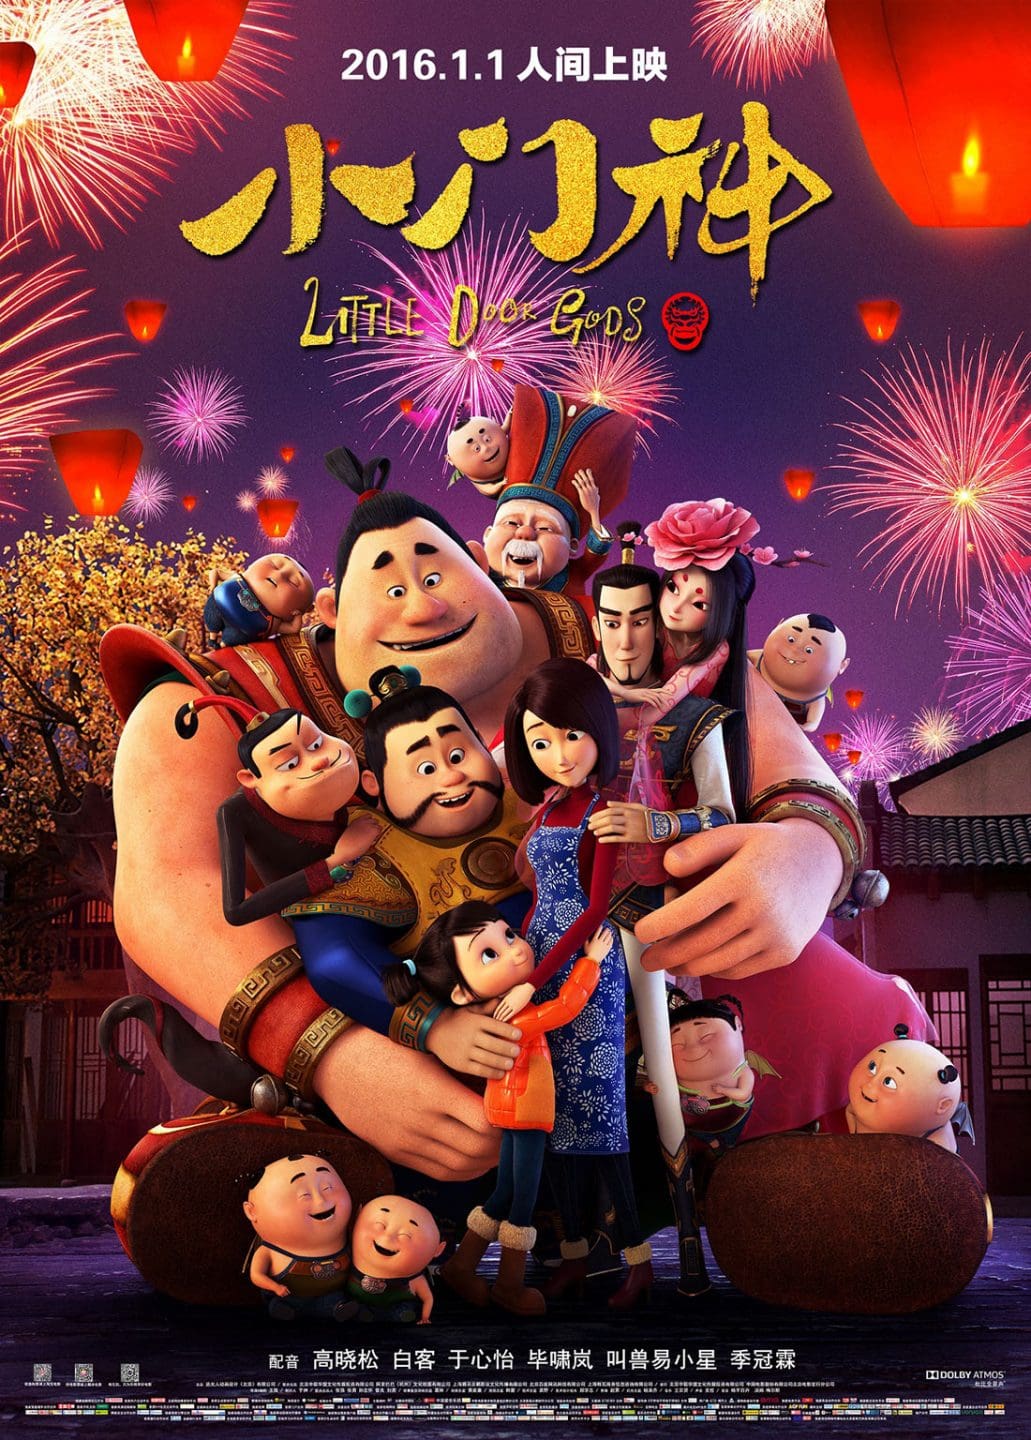 The poster for the original Chinese version "Little Door Gods."